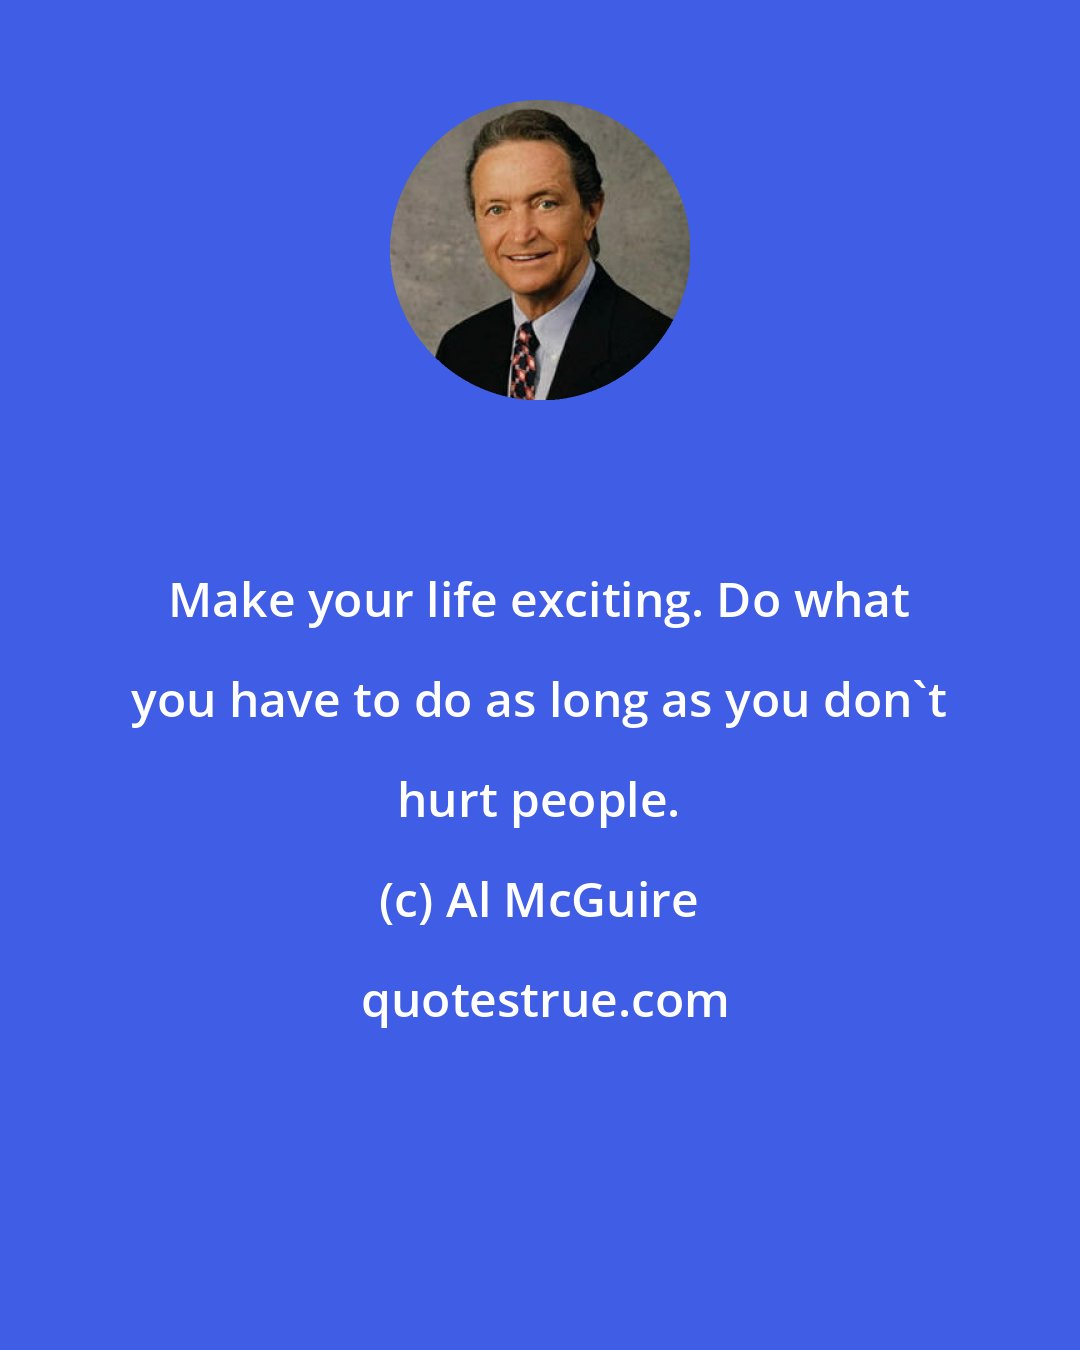 Al McGuire: Make your life exciting. Do what you have to do as long as you don't hurt people.